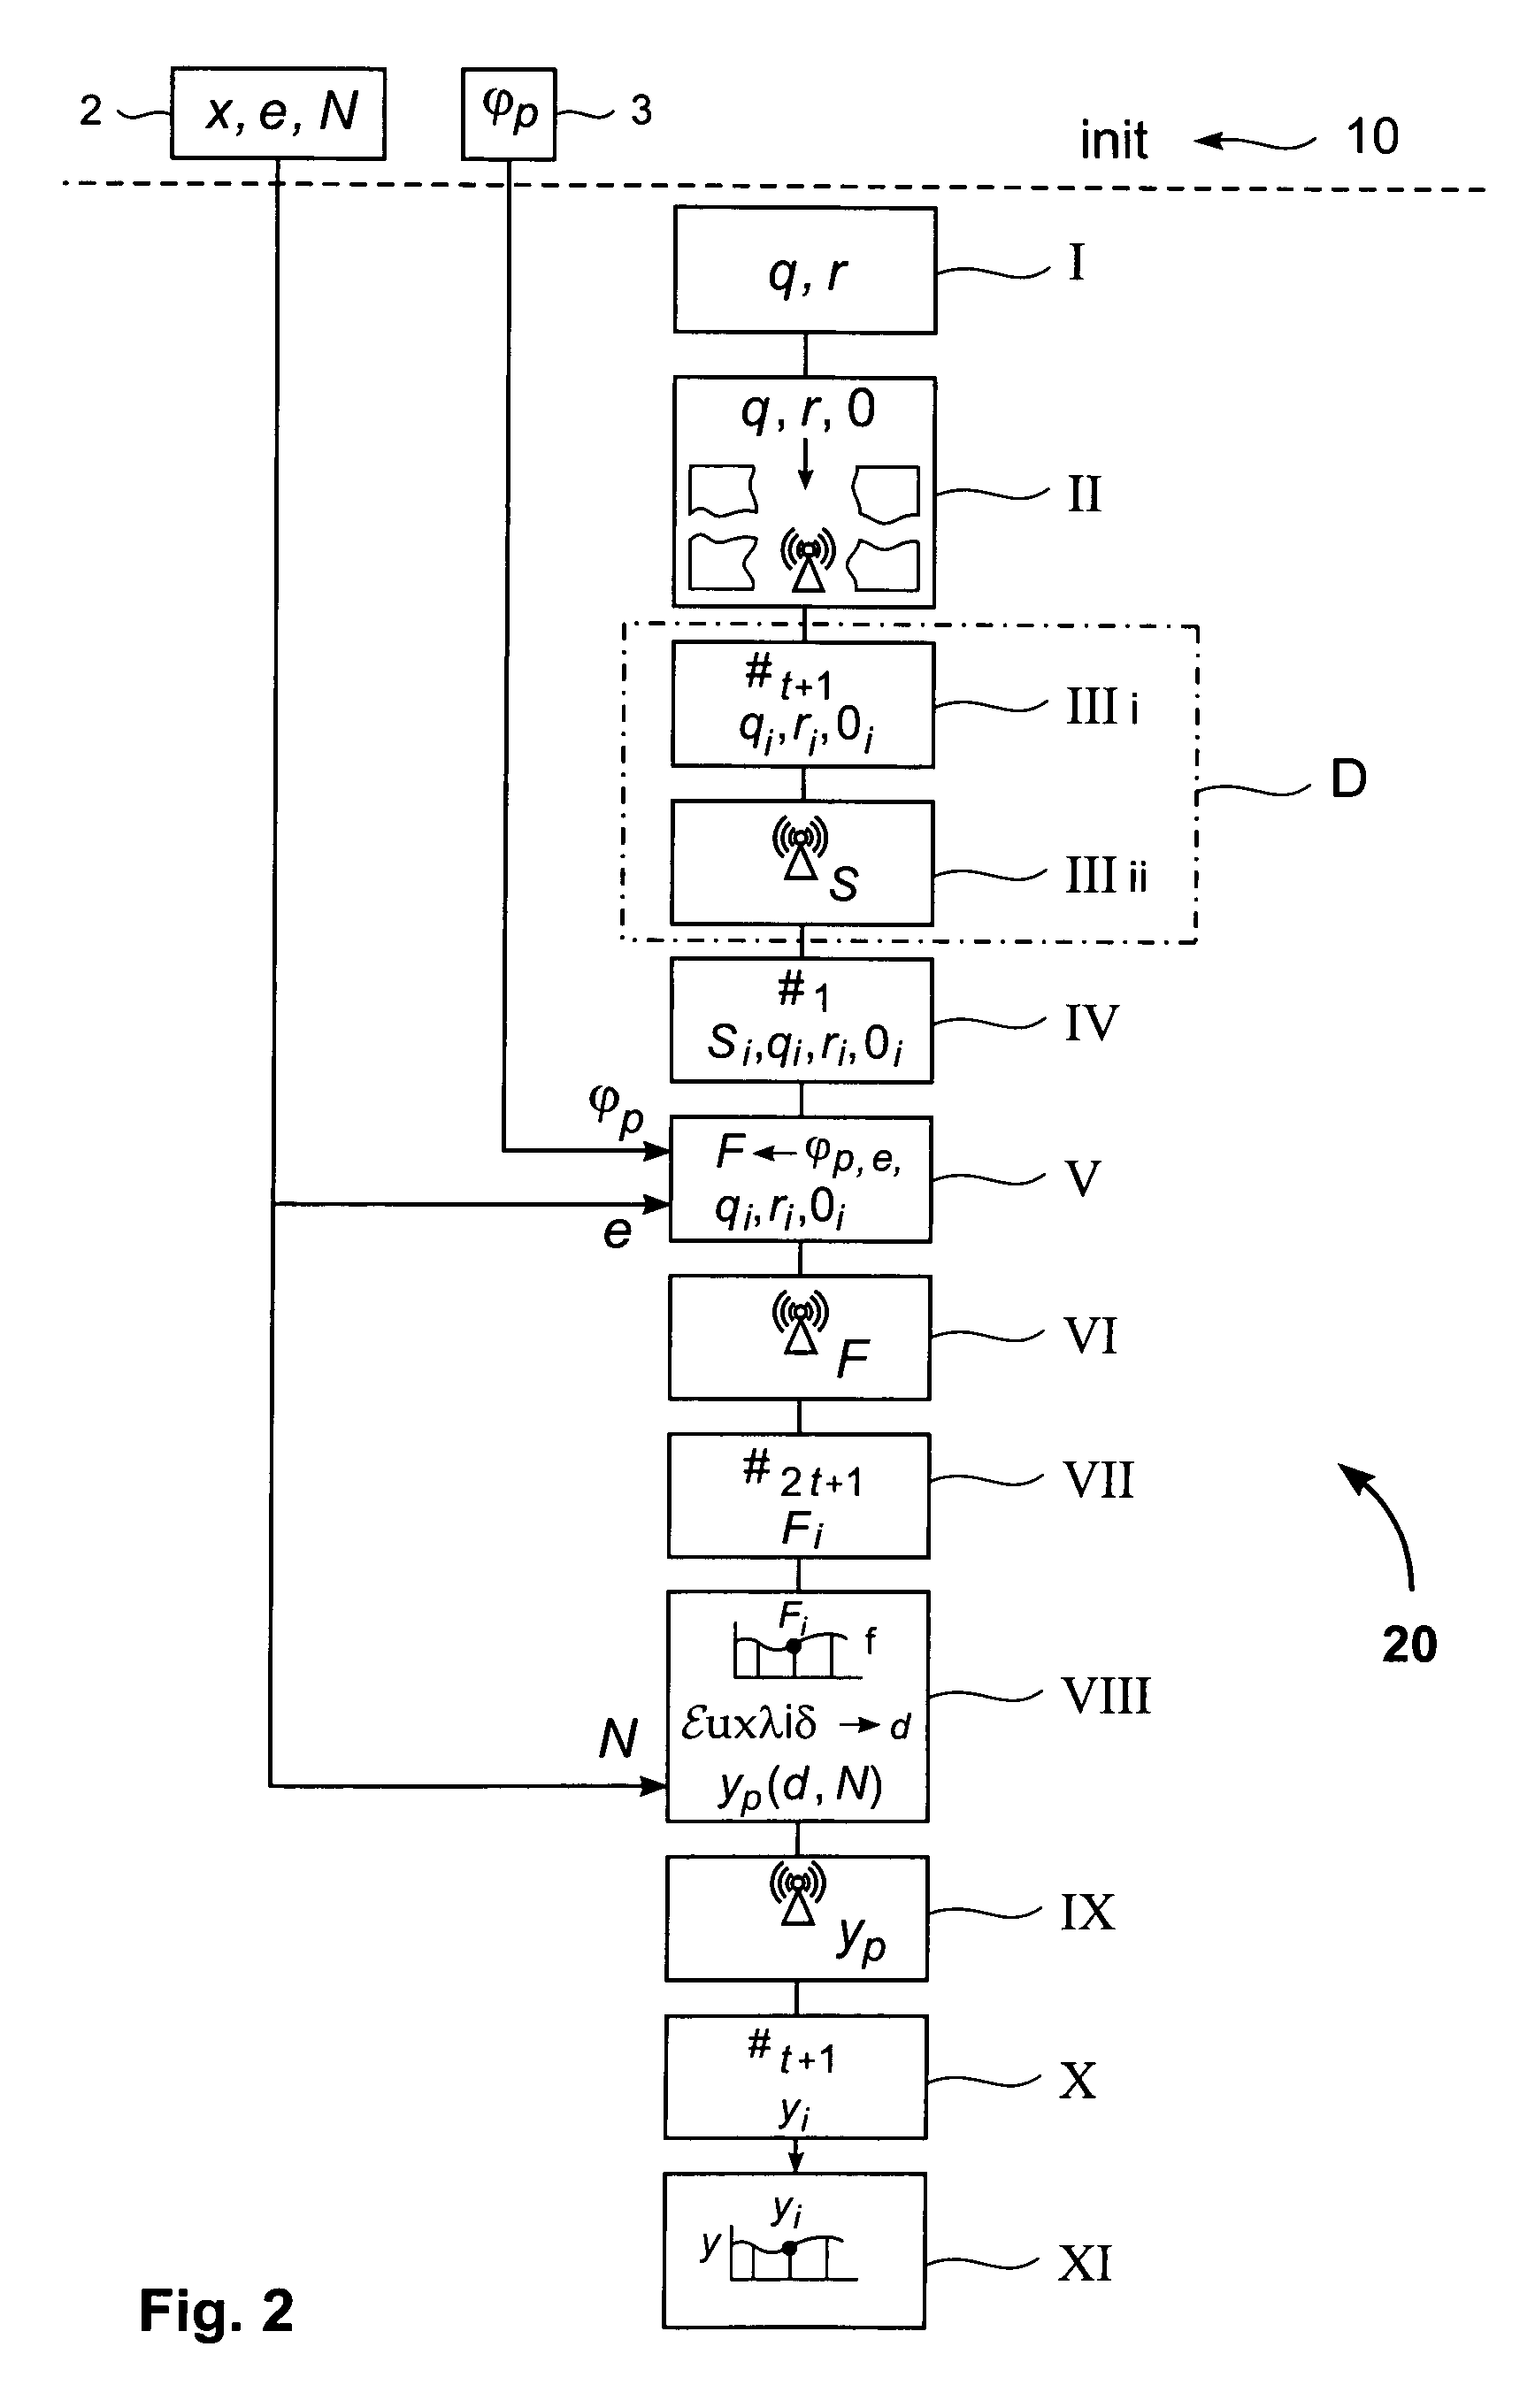 Method for distributed computation of RSA inverses in asynchronous networks